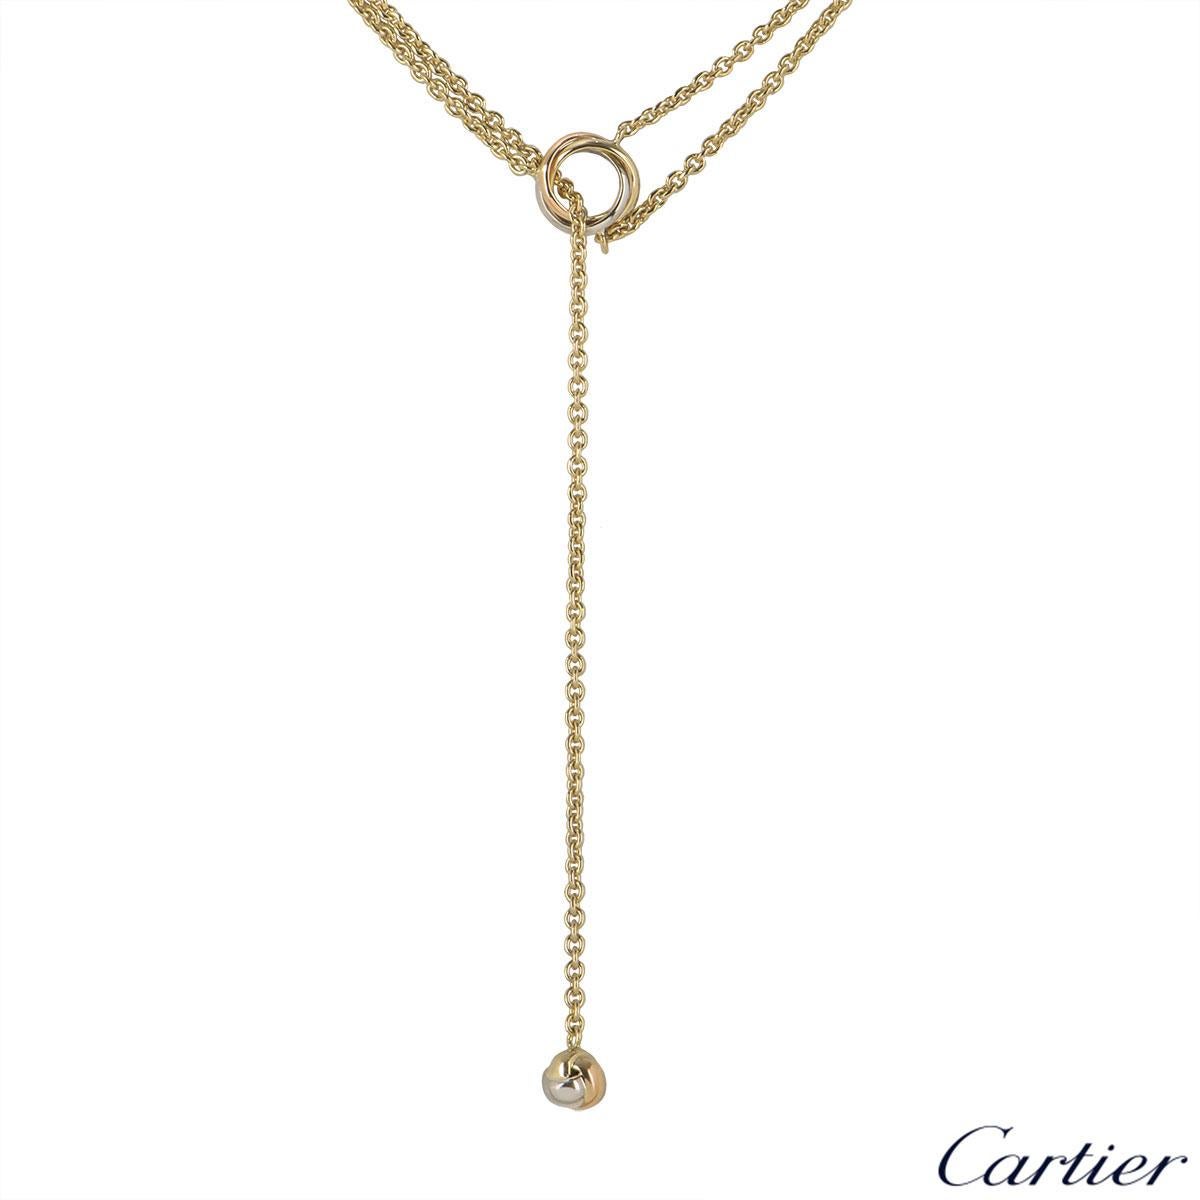 An 18k tri-colour gold necklace by Cartier from the Baby Trinity collection. The necklace features 3 iconic trinity rings intertwined with each other with a knot motif suspended at the bottom which can be adjusted in length. The necklace has a total